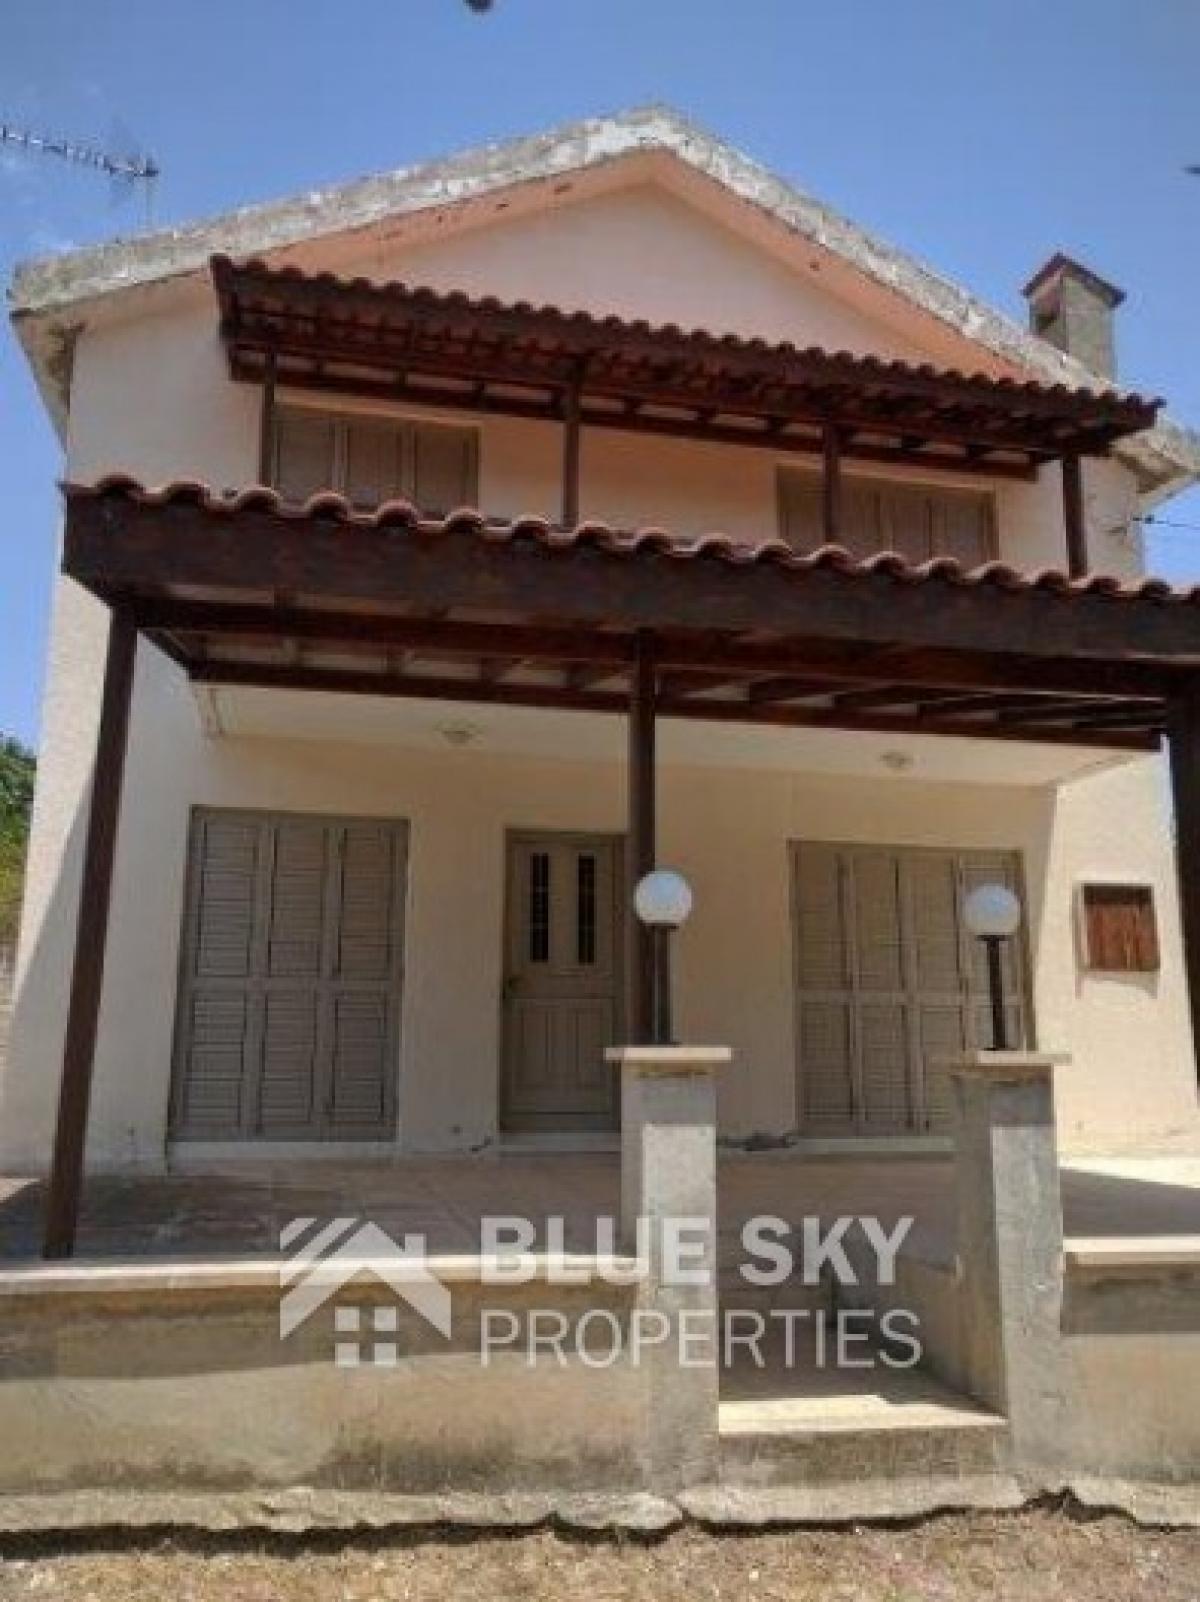 Picture of Home For Sale in Trimiklini, Limassol, Cyprus